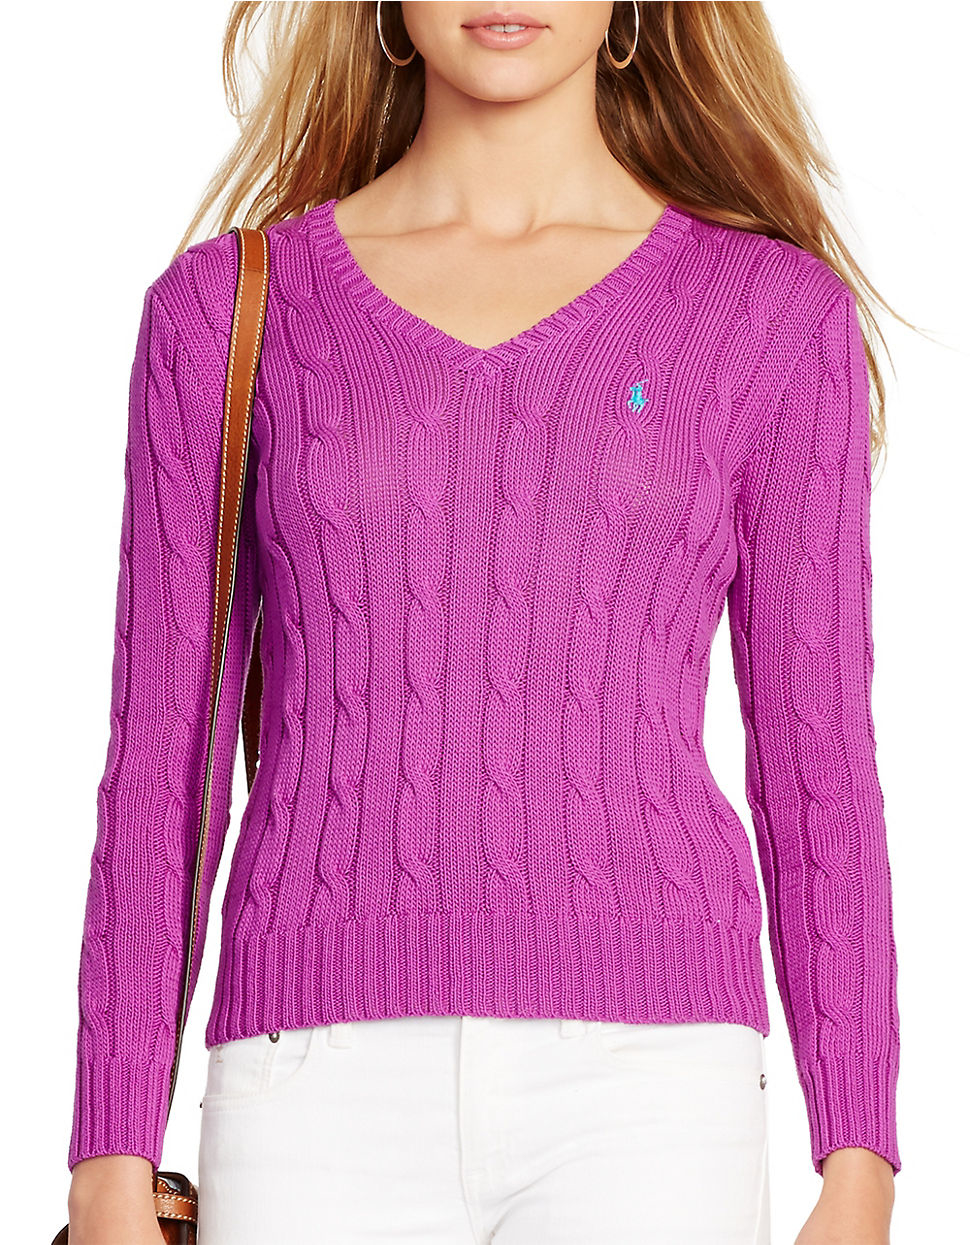 Lyst - Polo Ralph Lauren Cabled V-neck Sweater in Purple